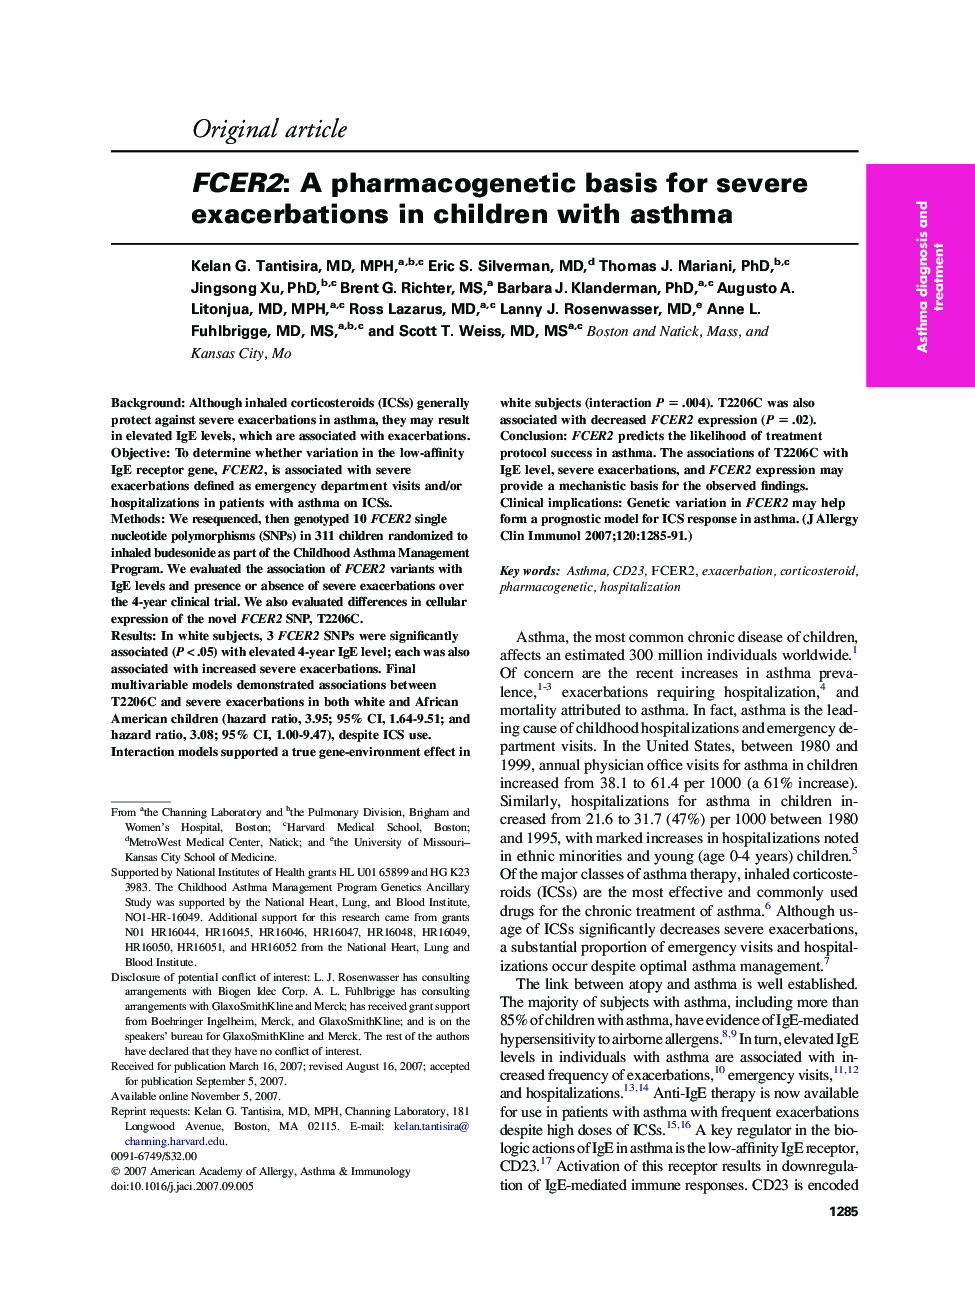 FCER2: A pharmacogenetic basis for severe exacerbations in children with asthma 